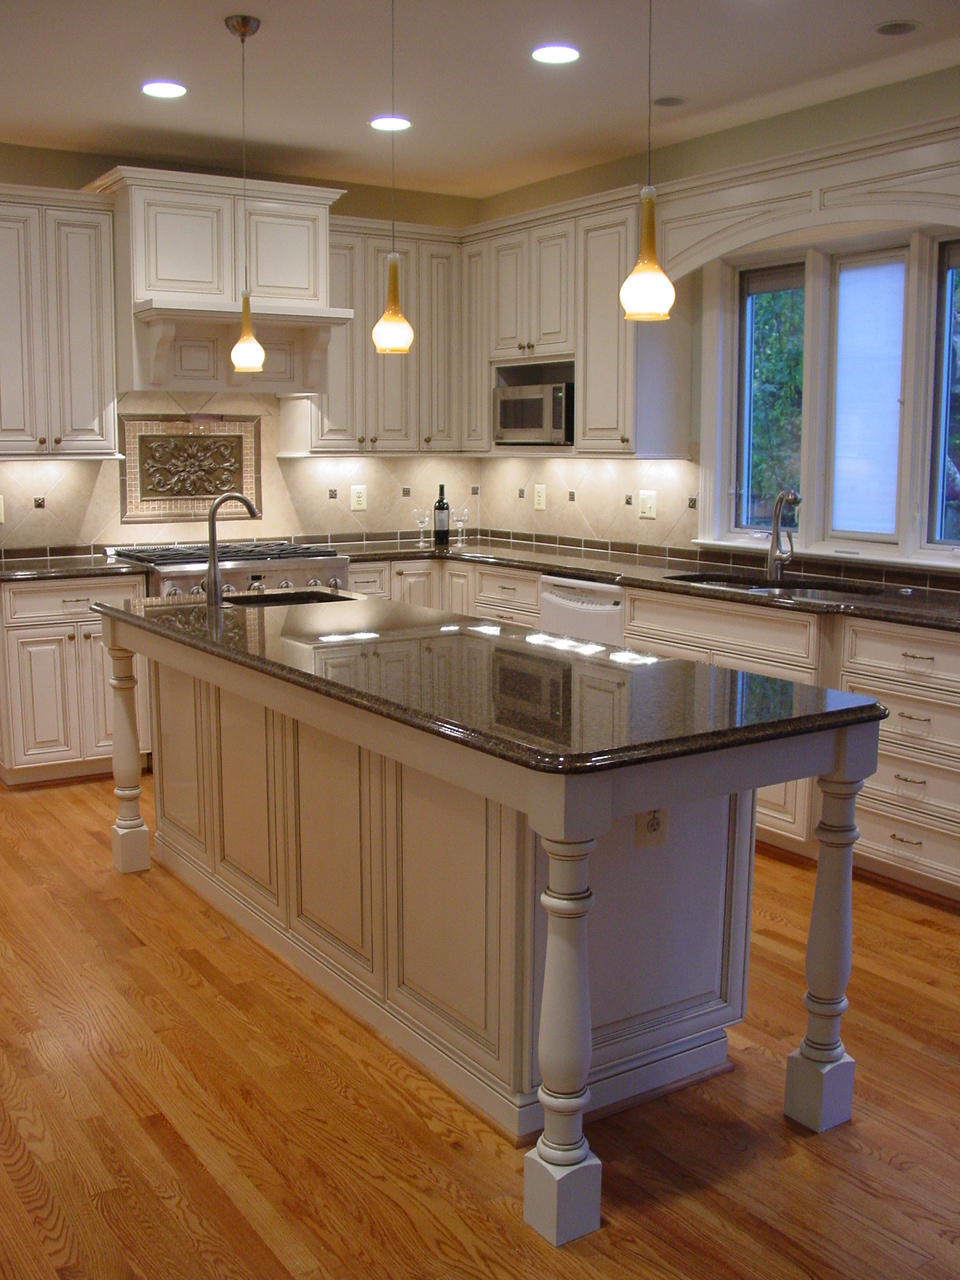 Kcr50 Kitchen Cabinet Remodeling Today